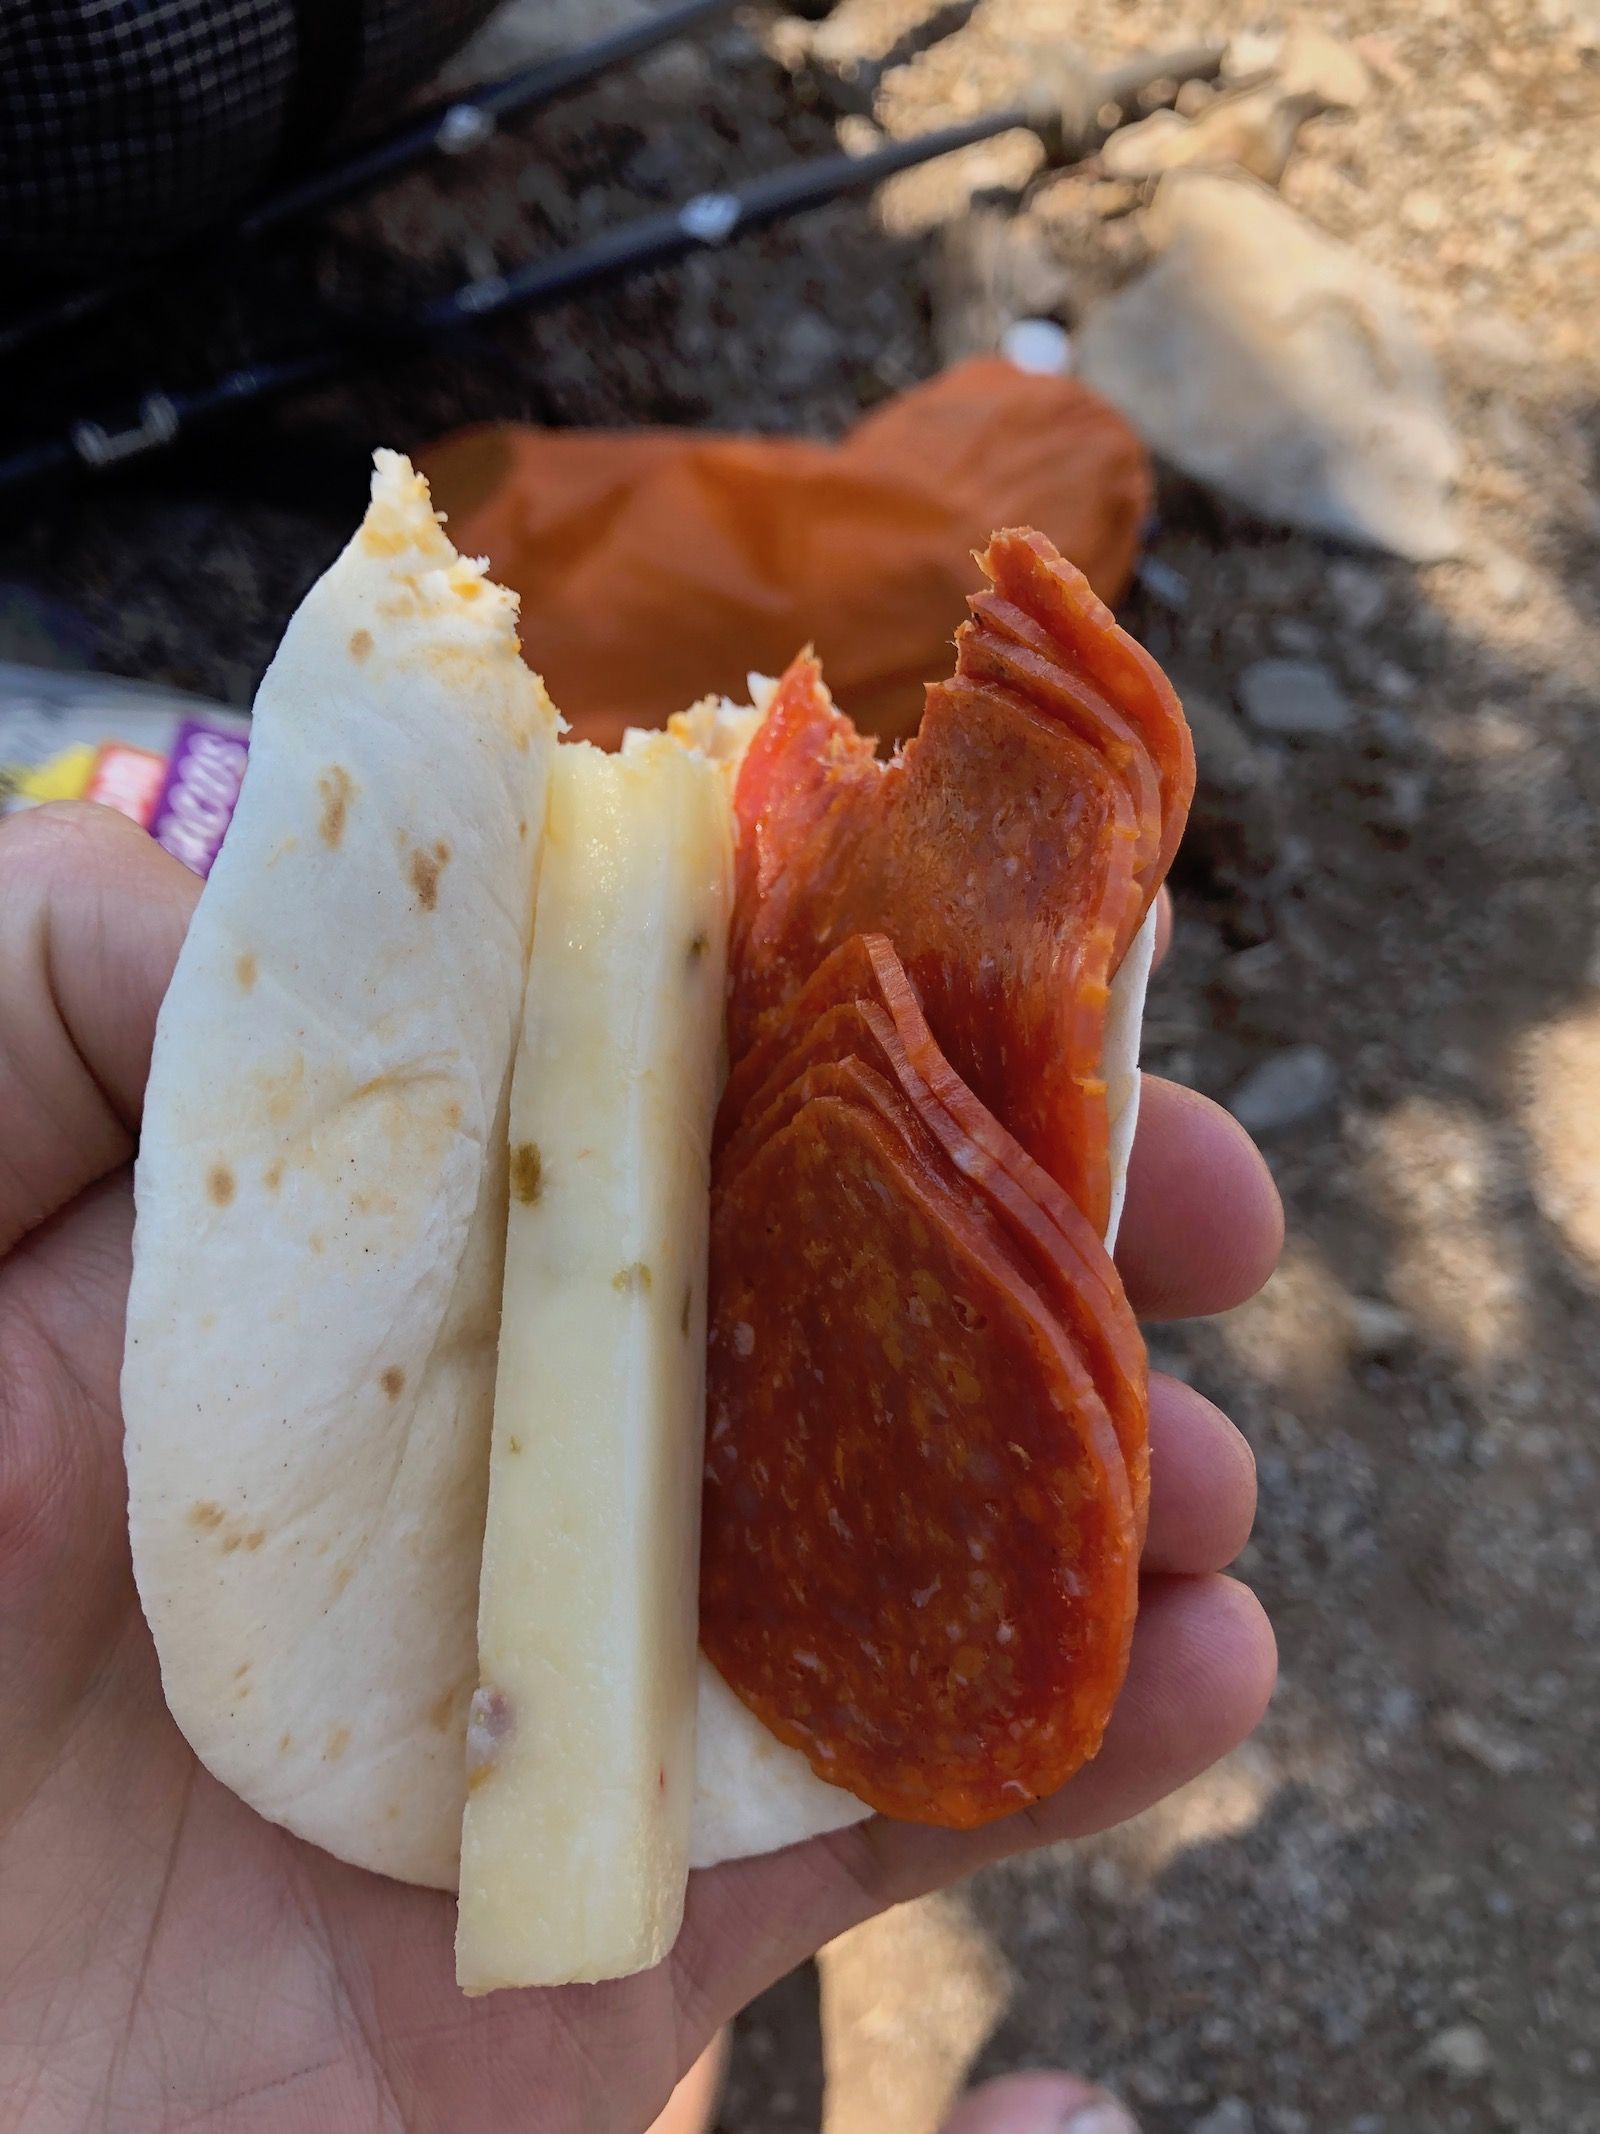 A healthy hiker snack.